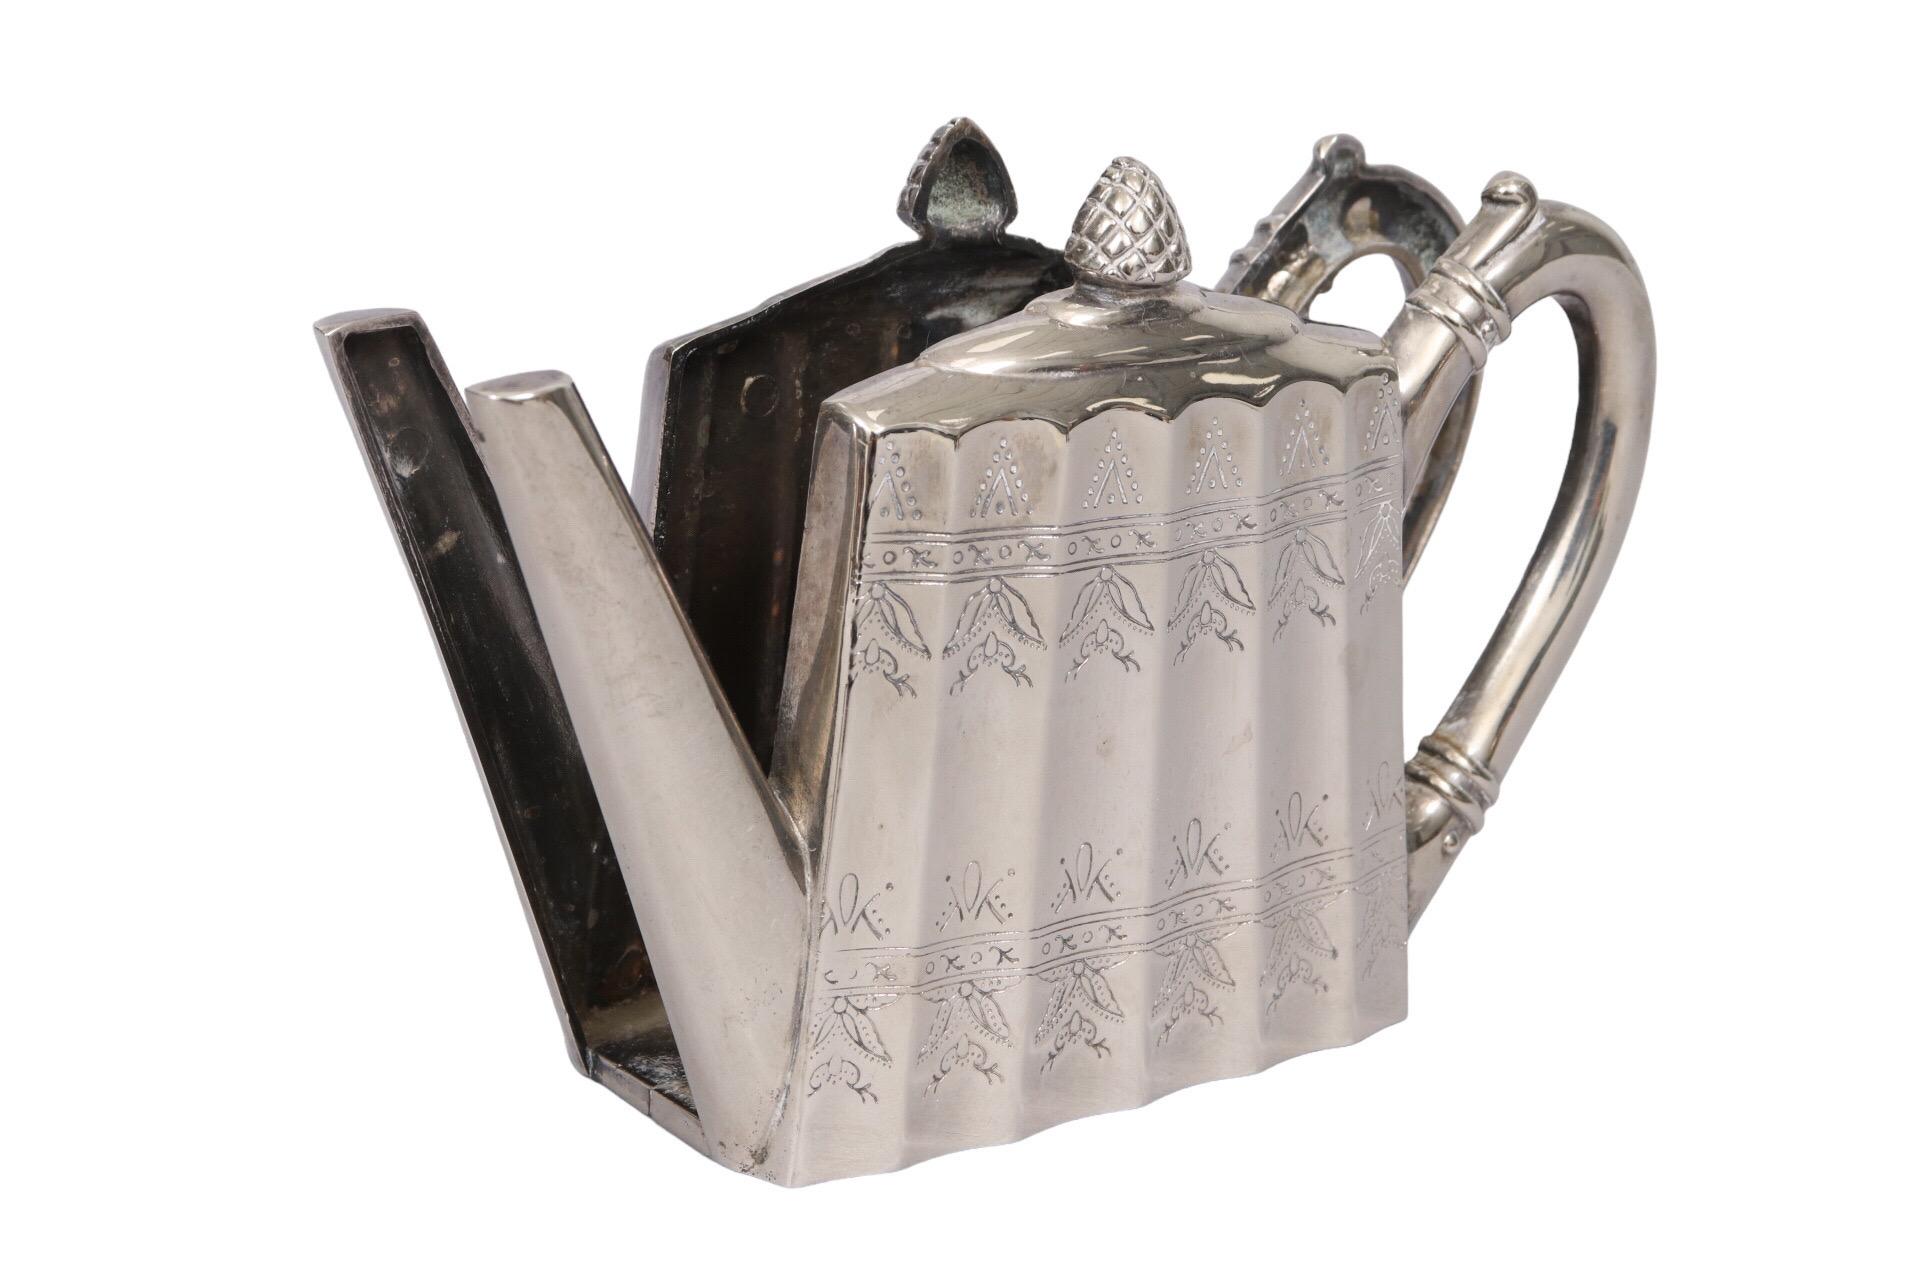 An engraved silver-plated napkin holder made by Godinger. Shaped like a teapot with a scalloped body and repeating floral motif. Marked Godinger Silver 1998 underneath.